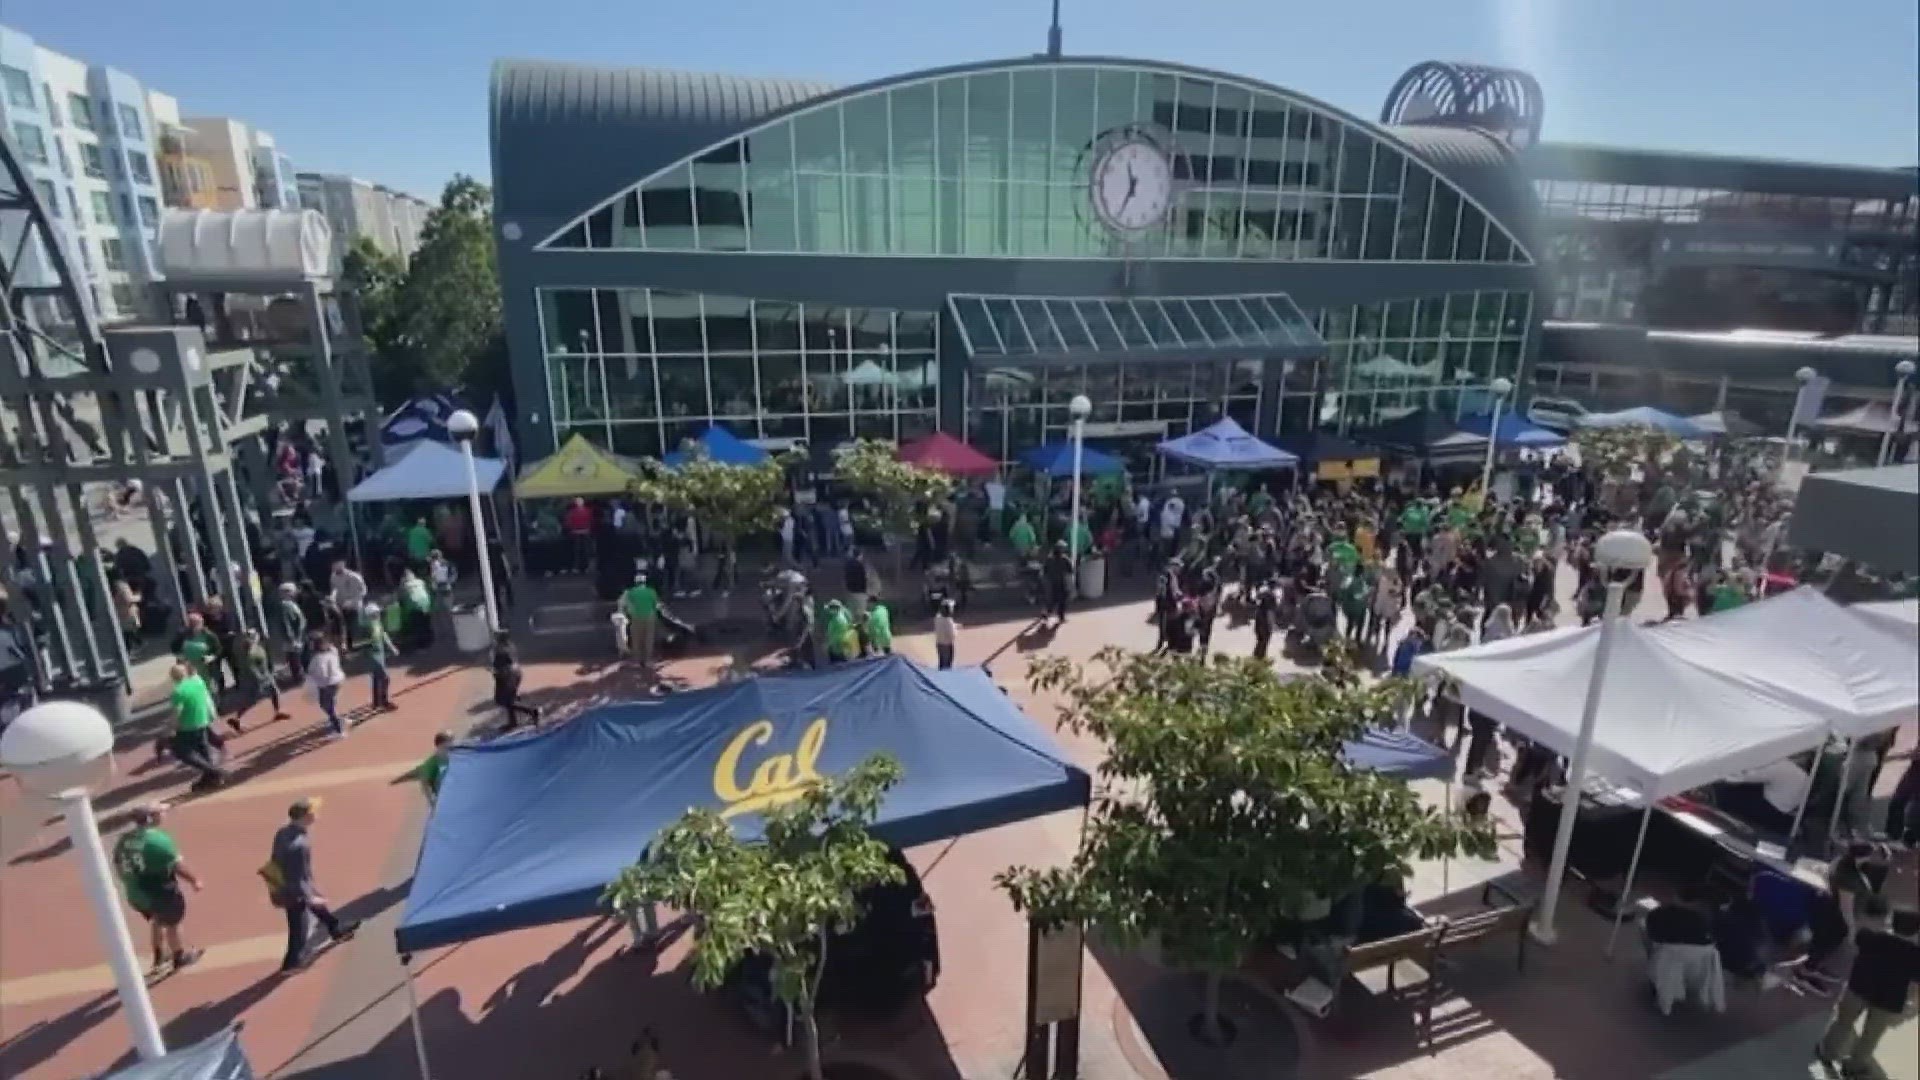 The event was held as another part of the fans "reverse boycott" to try and keep the A's in Oakland.